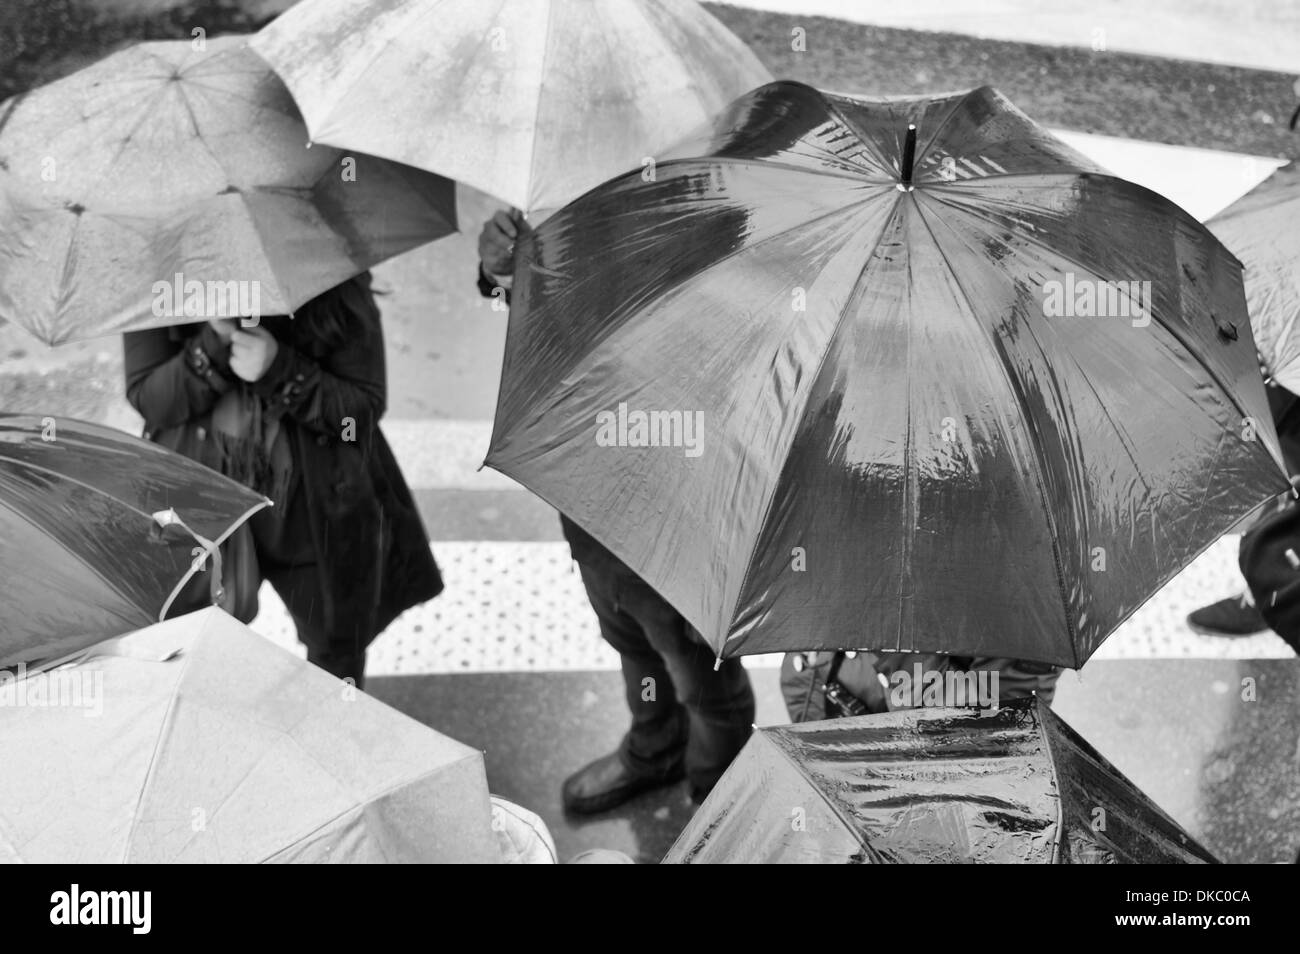 Paris, France - unidentifiable people with umbrellas in the rain Stock Photo